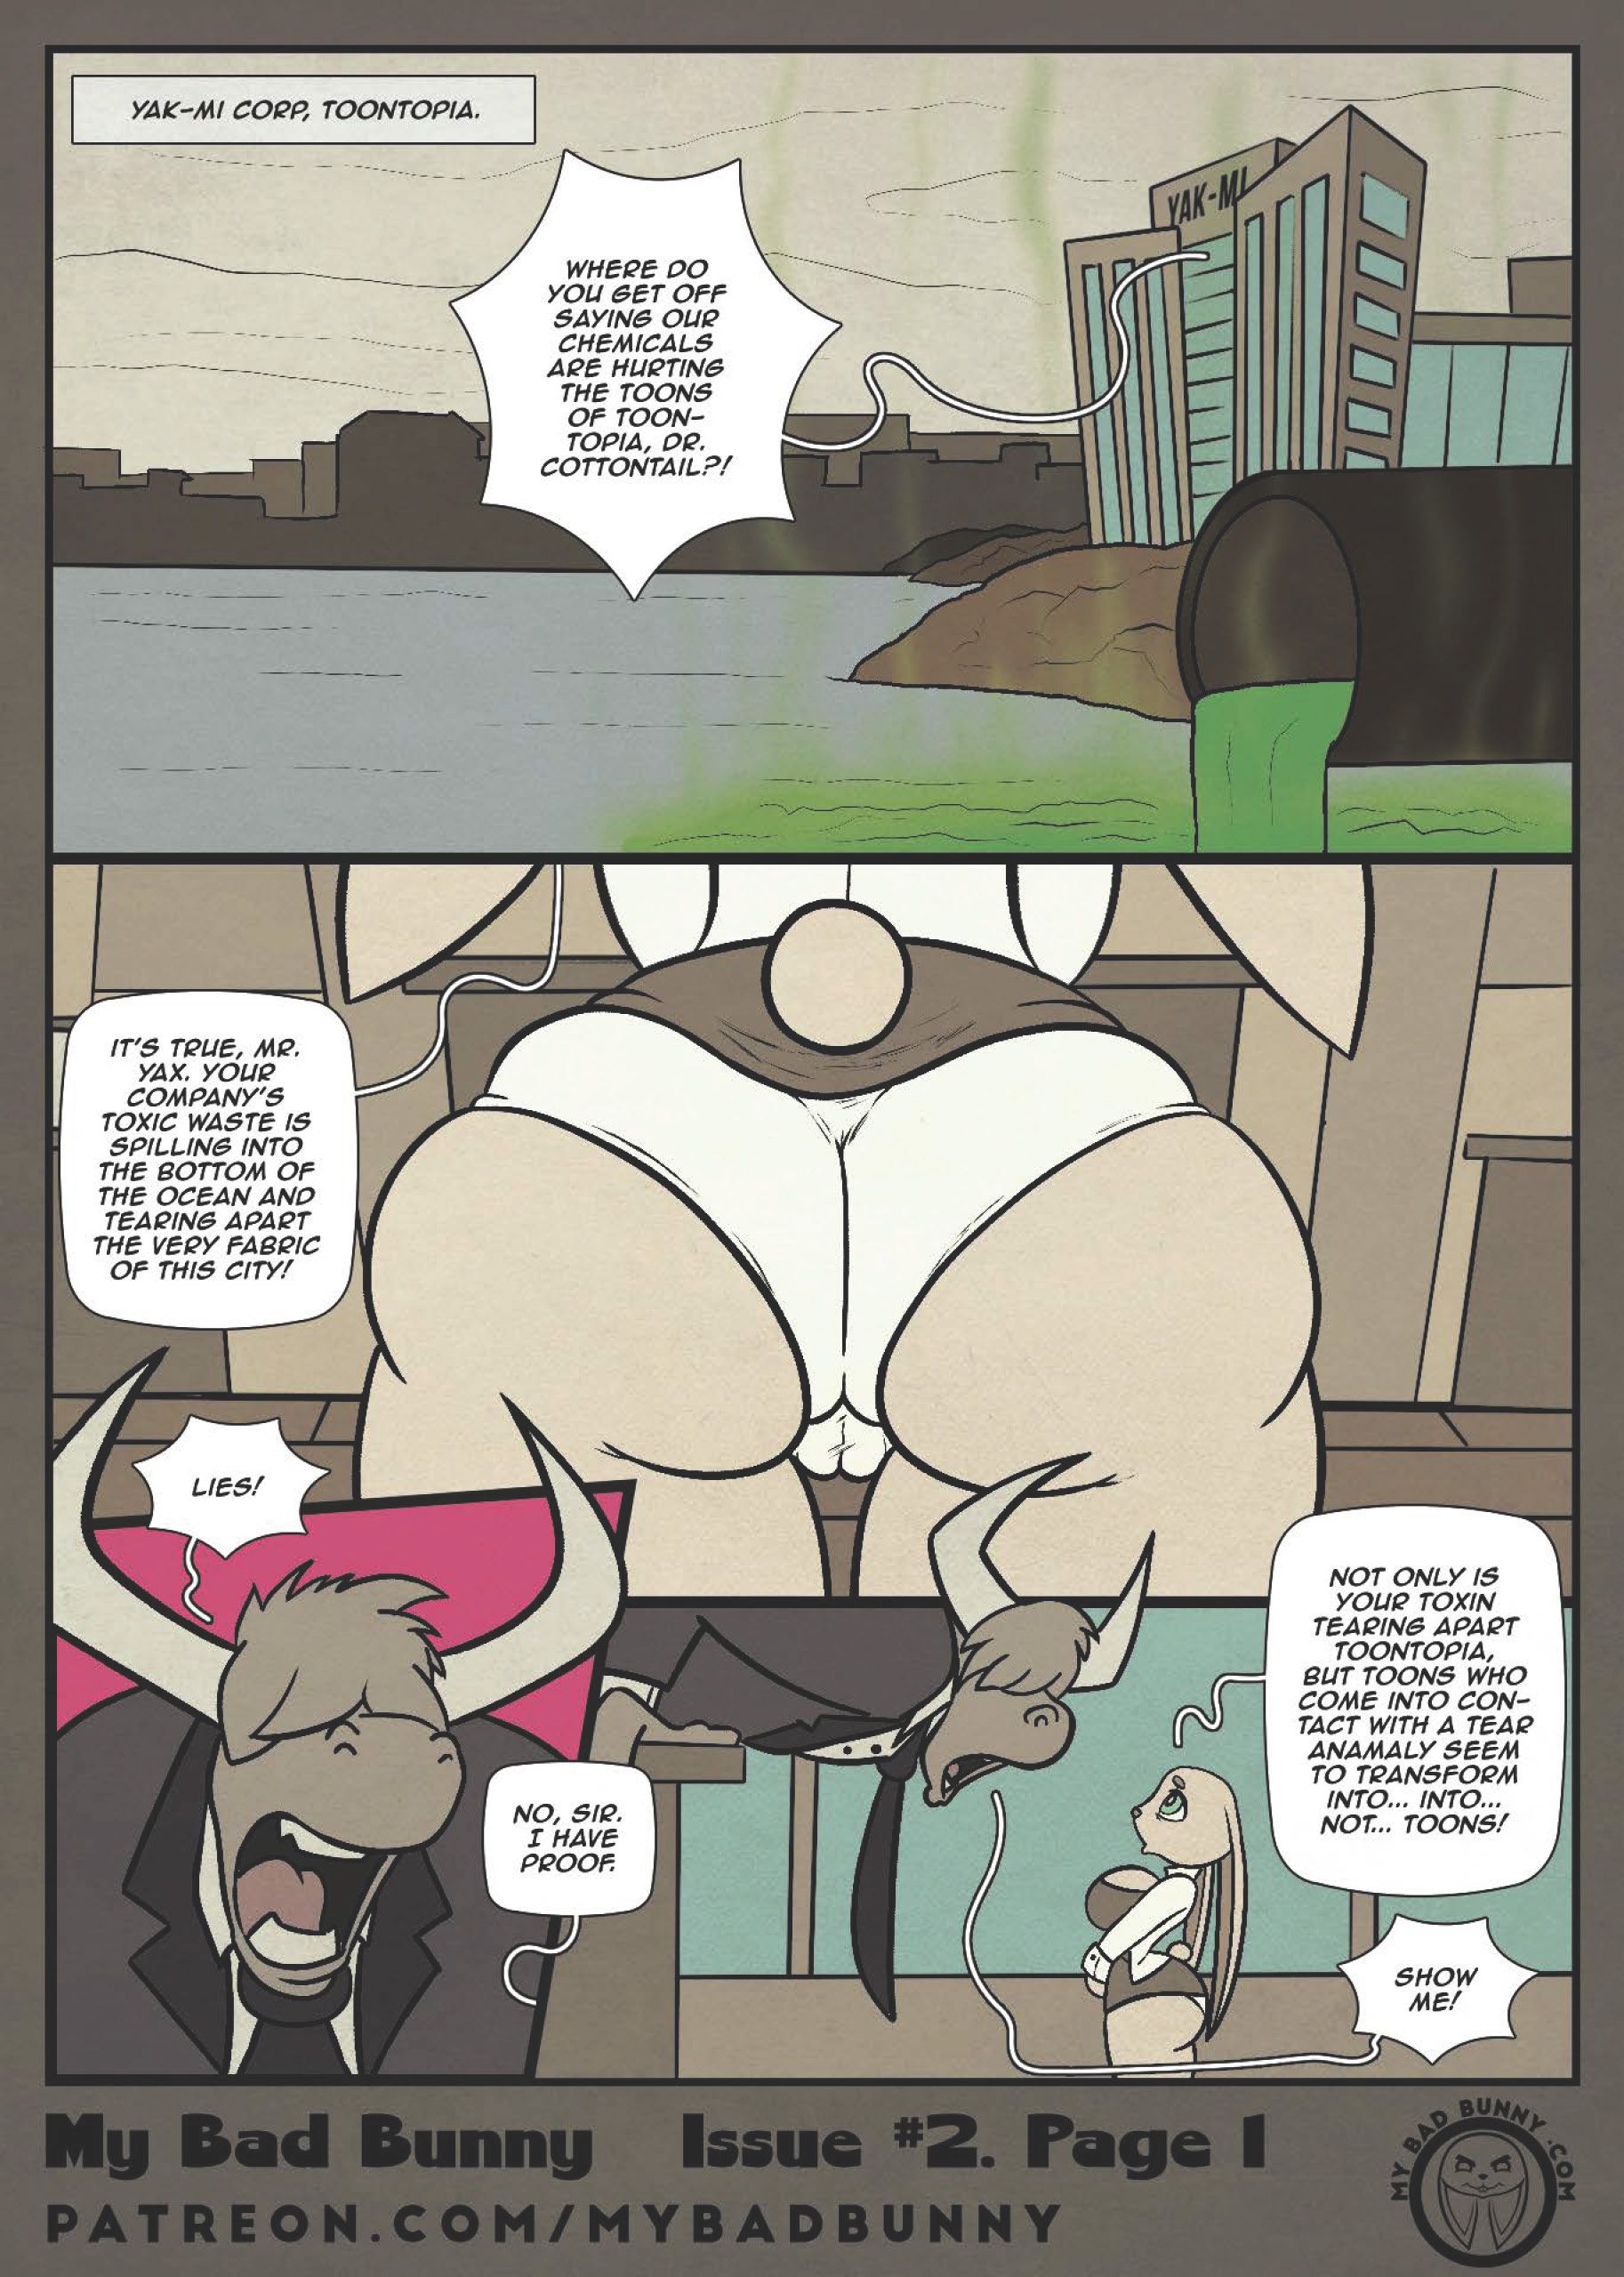 dbeee2dfe9ddb755a99e2be1be2247d6 – My_Bad_Bunny_Issue_2_Page_01